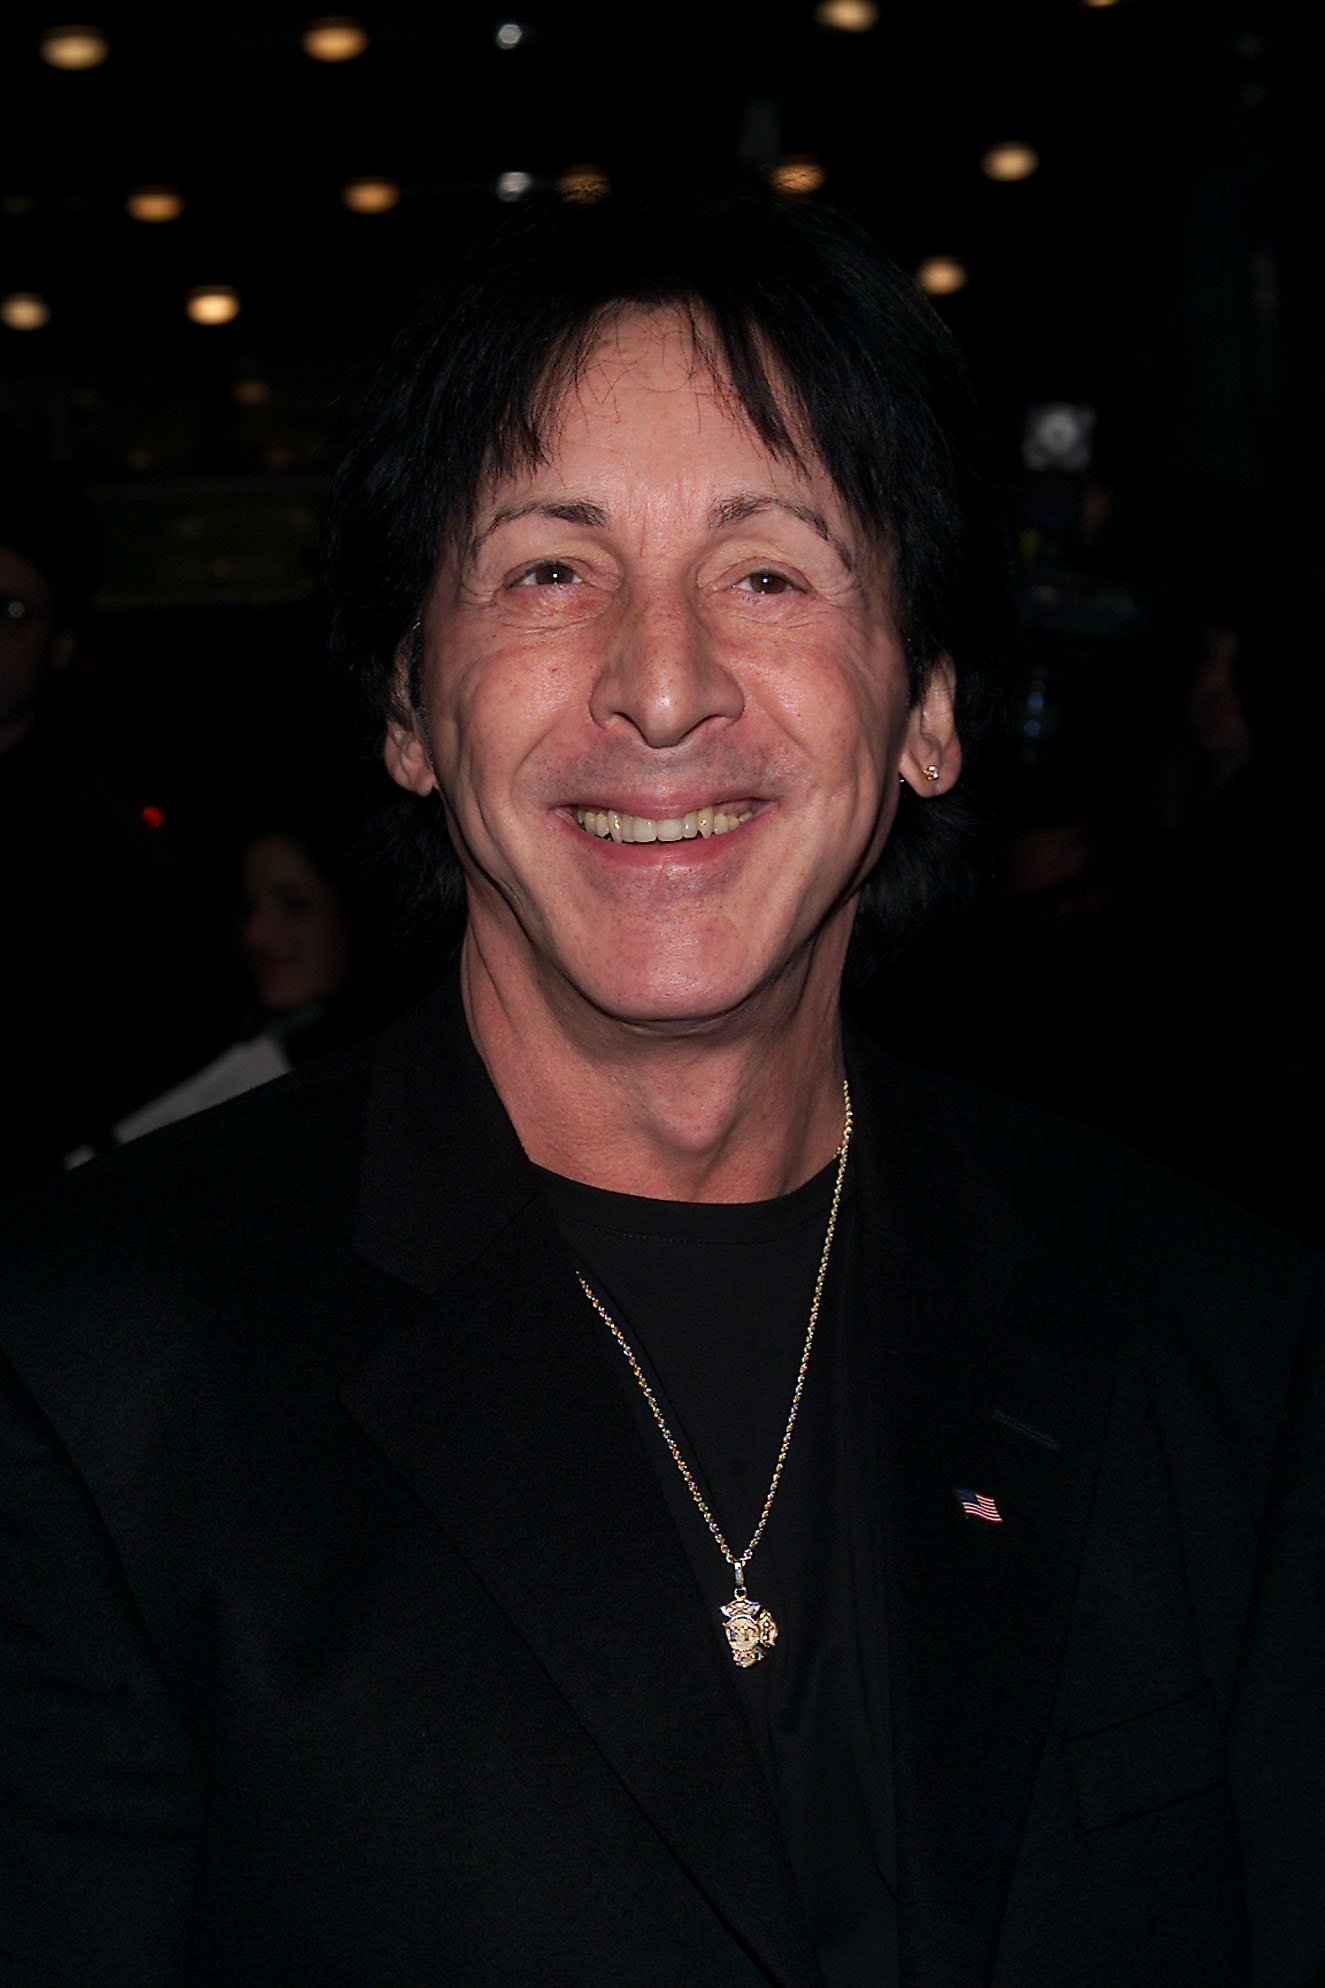 Peter Criss of Kiss in New York City on May 11, 2001 | Source: Getty Images